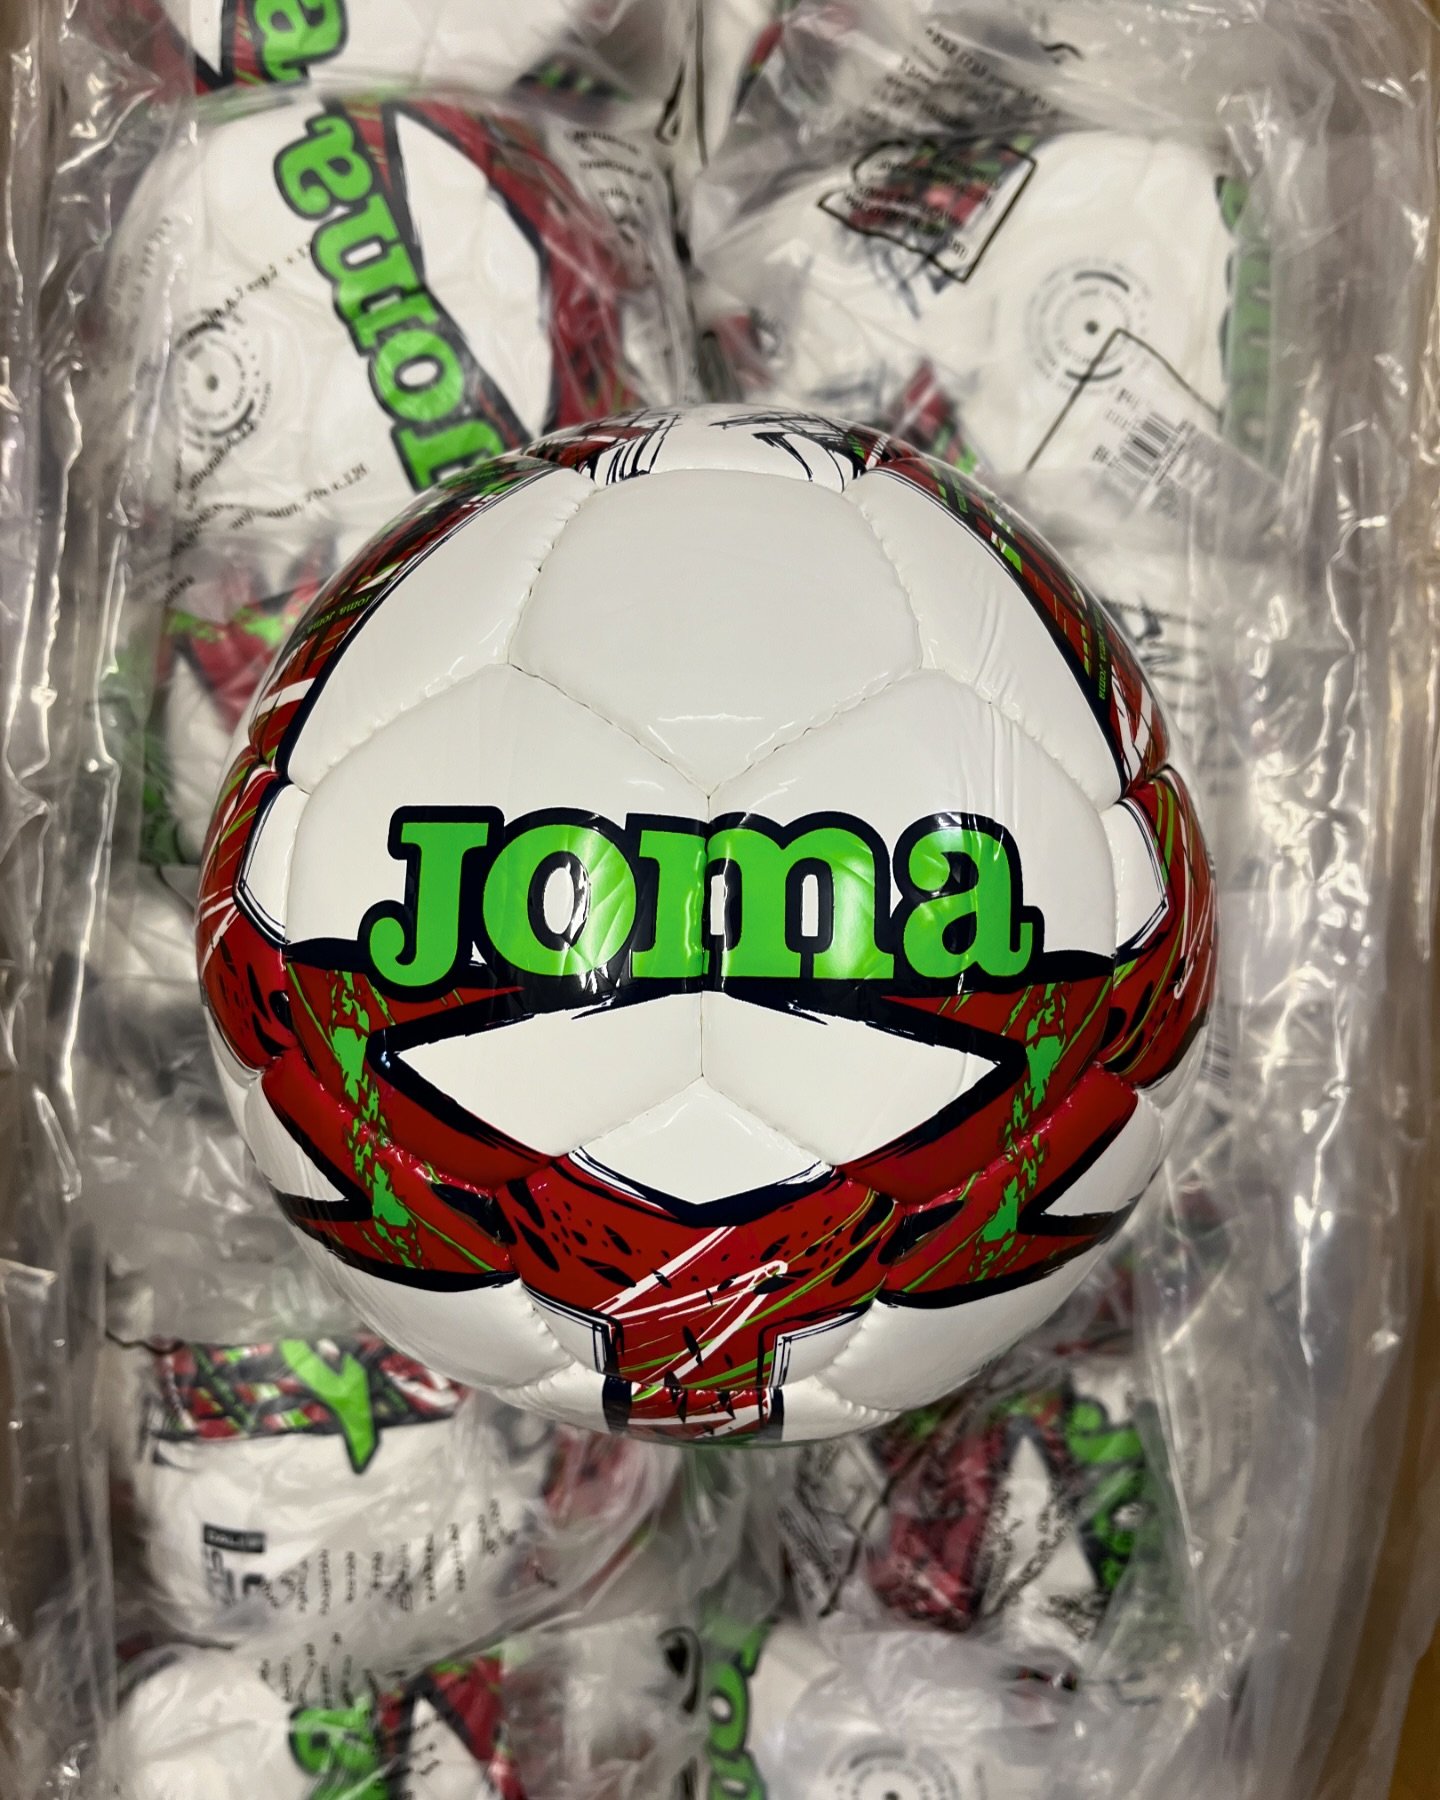 Get your Joma Dali 3s before they&rsquo;re gone!!.. we have a range of sizes and brands available. Get in touch!! 

#joma #dali3 #jomadali3 #footballs #football #teamfootball